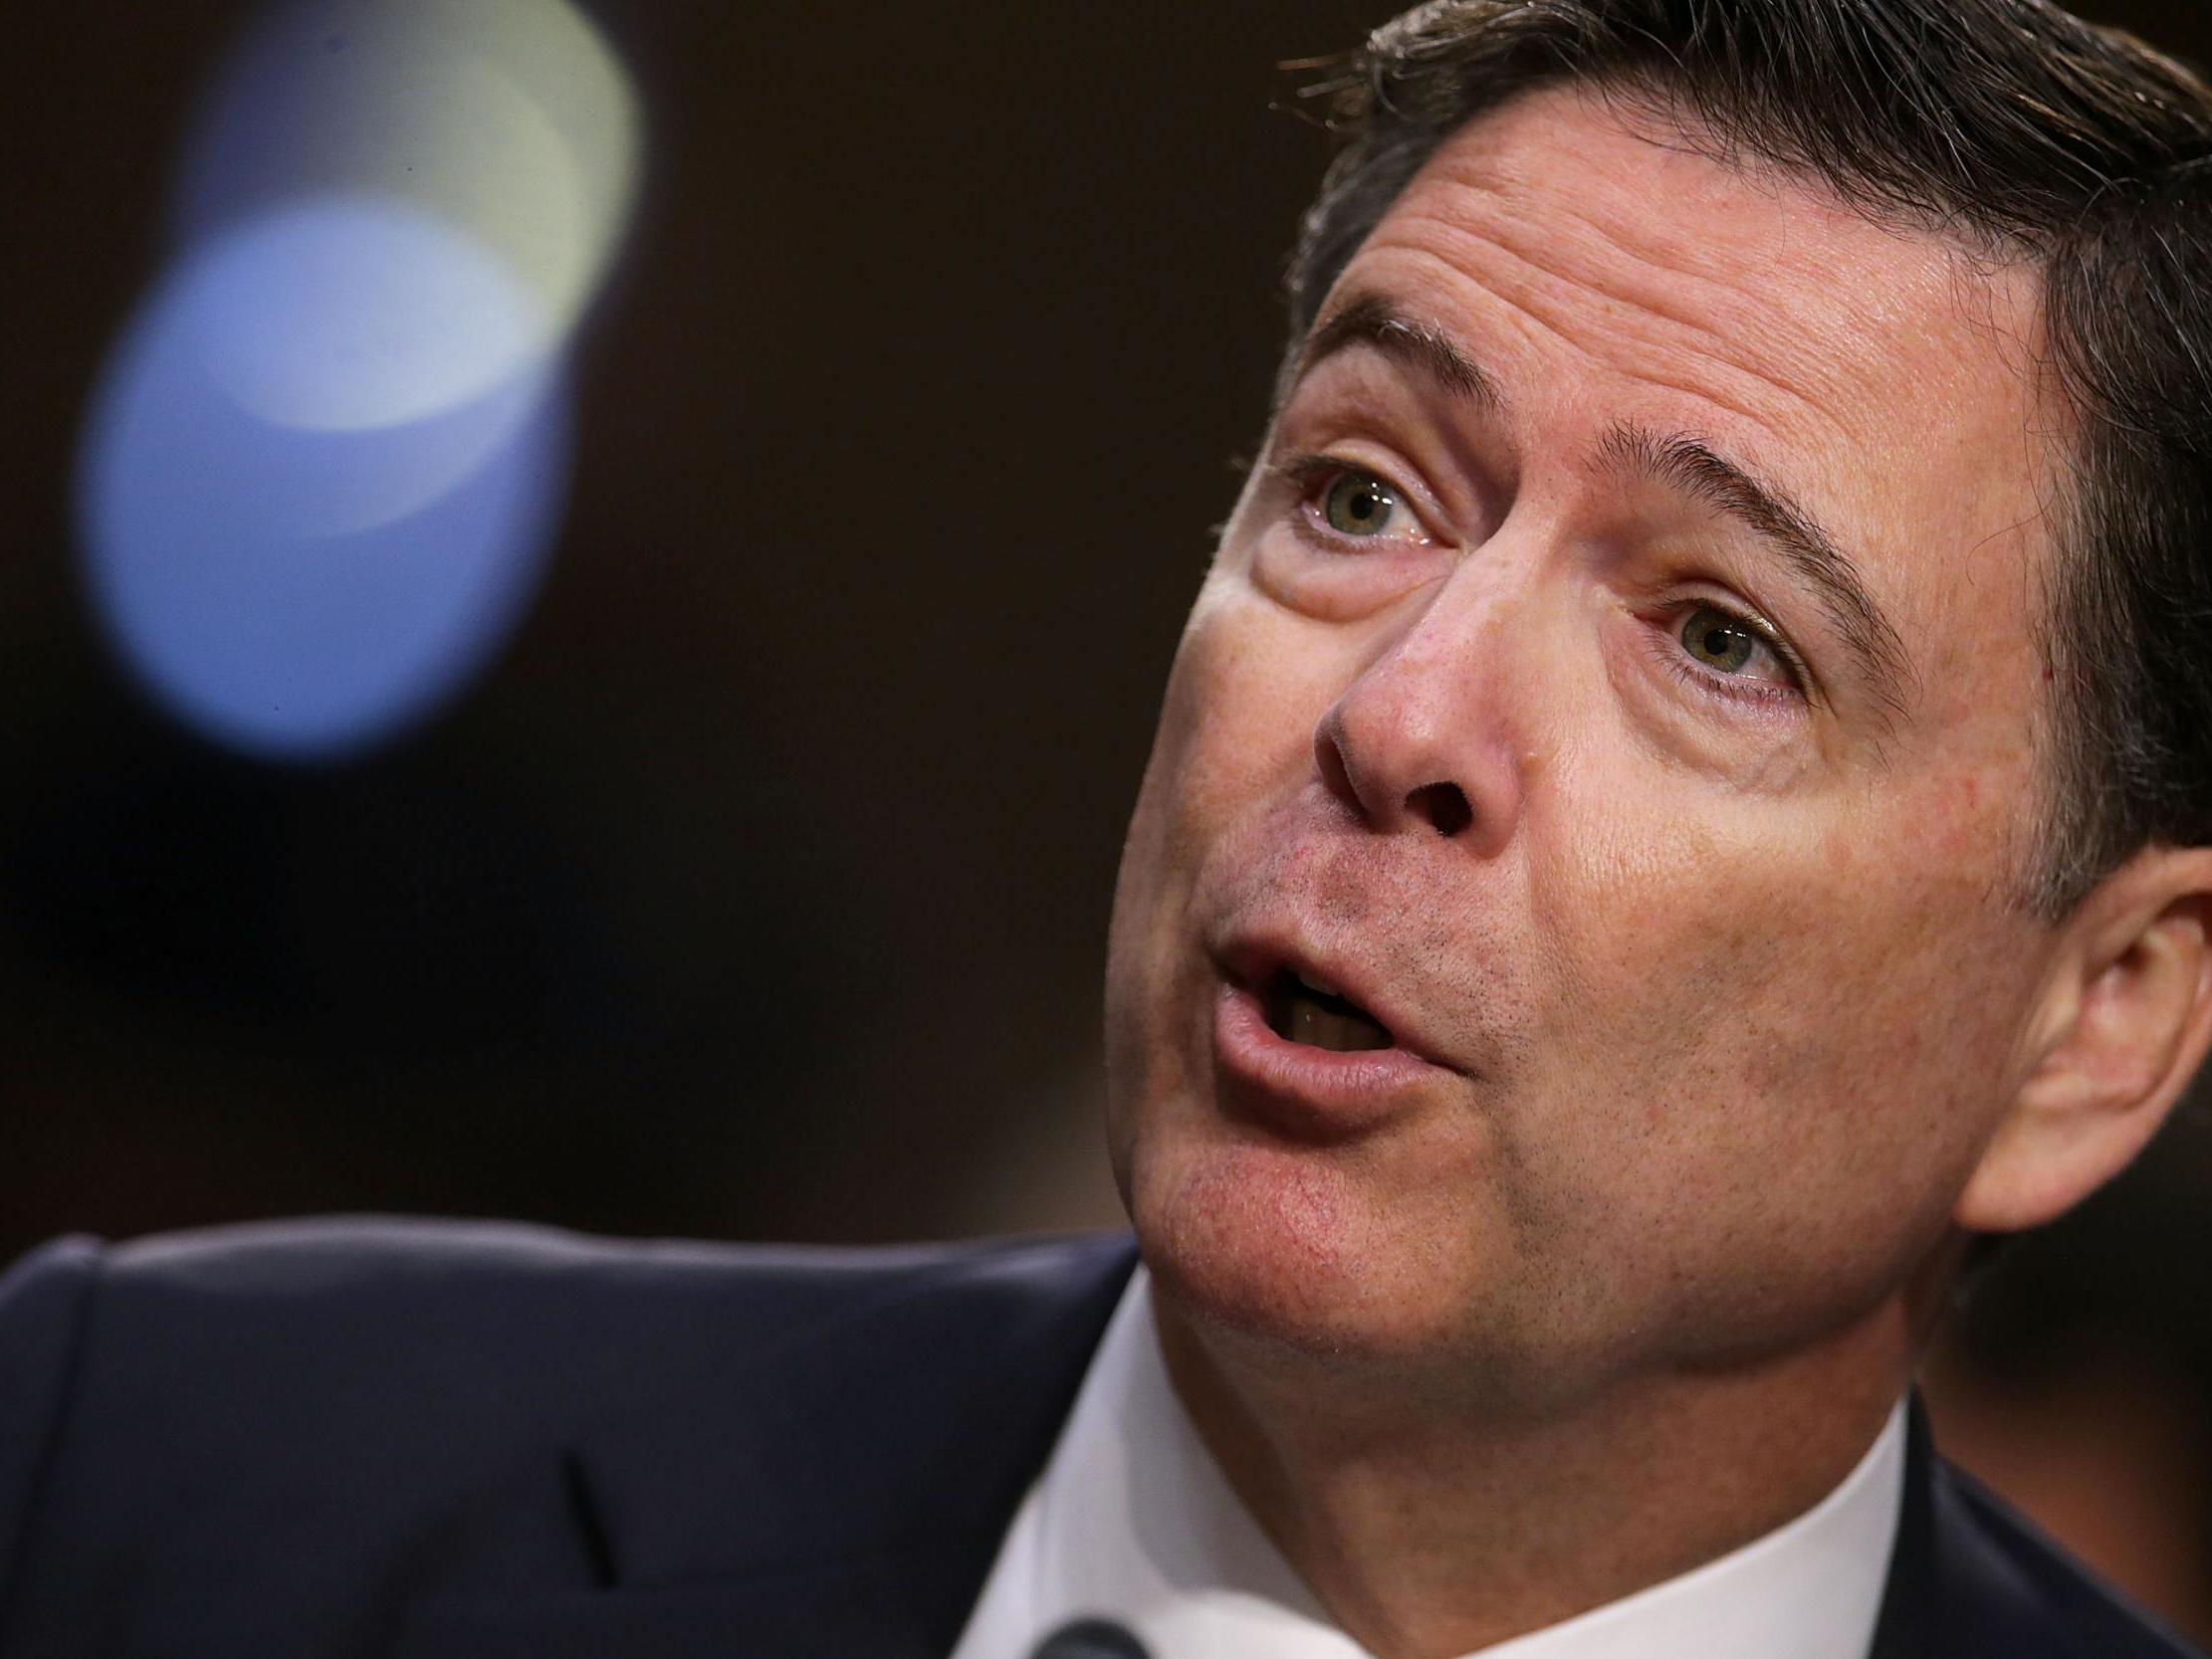 Comey hits out at Trump for appointing 'personal defense lawyer' as Attorney General